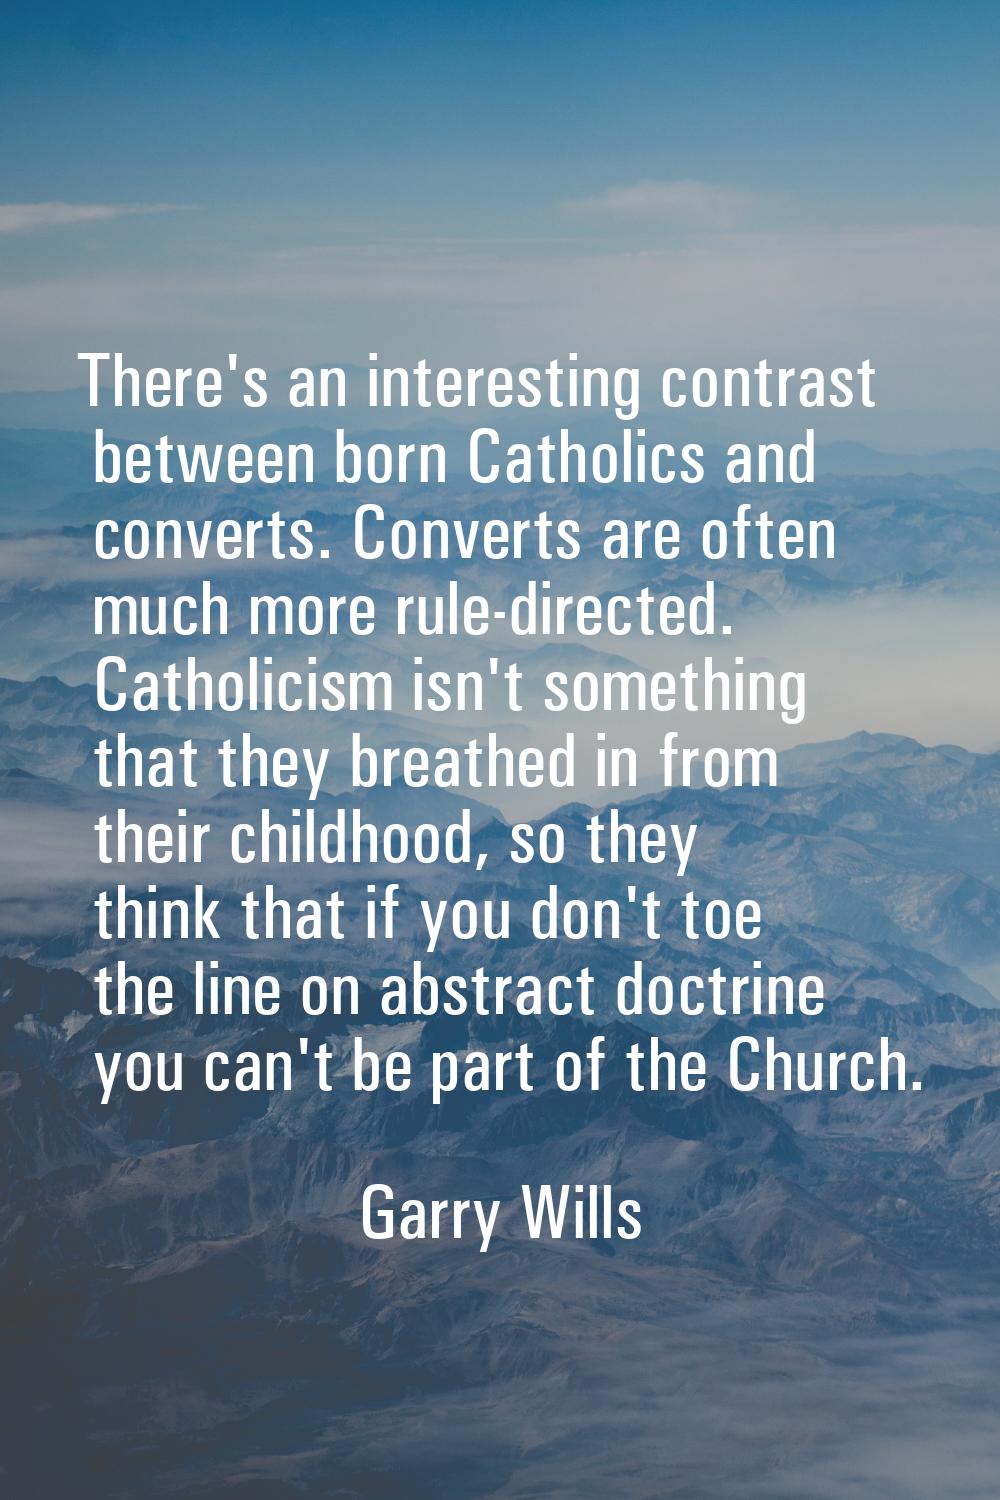 There's an interesting contrast between born Catholics and converts. Converts are often much more r